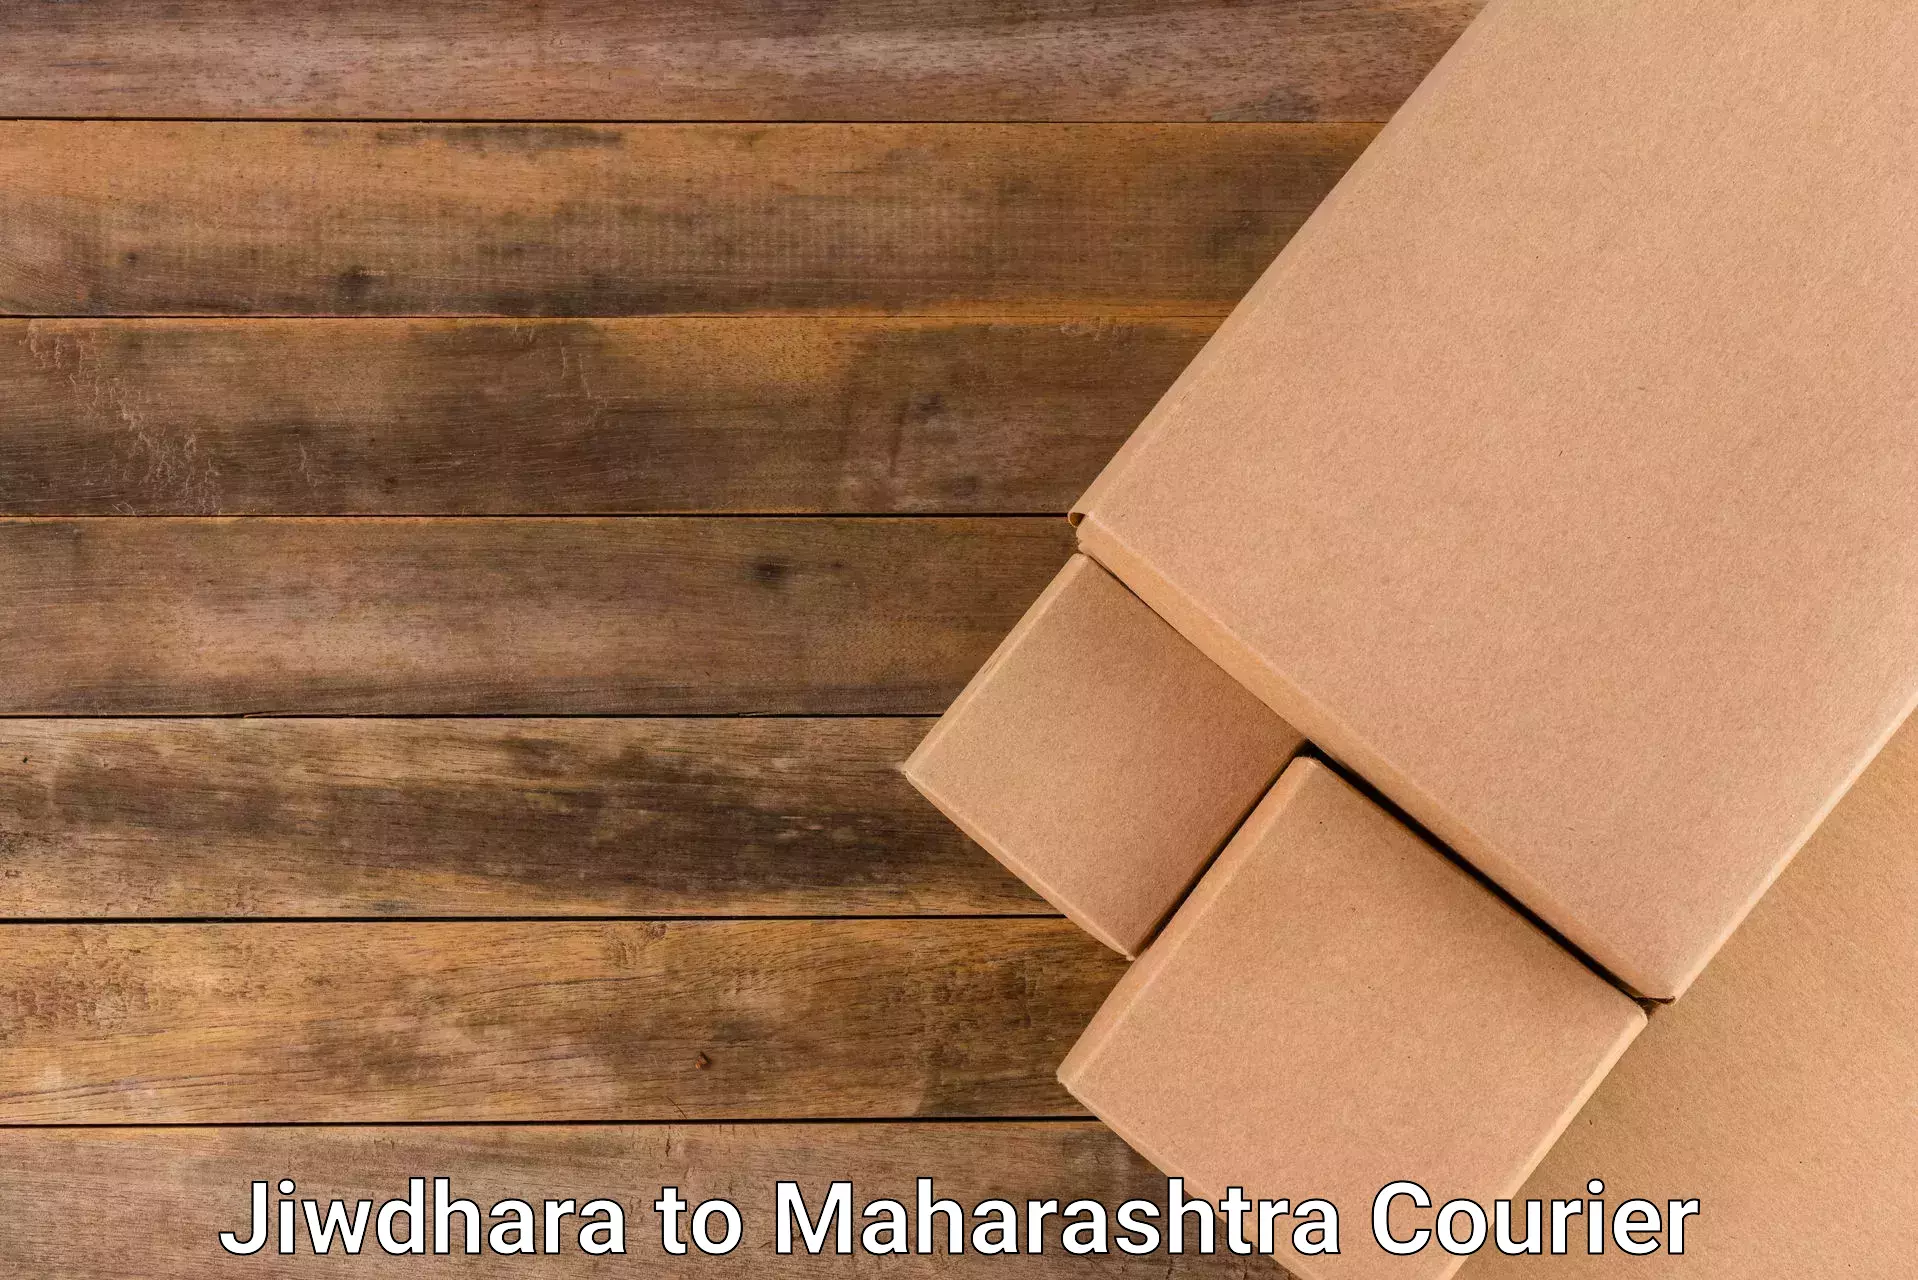 Parcel delivery automation in Jiwdhara to Maharashtra